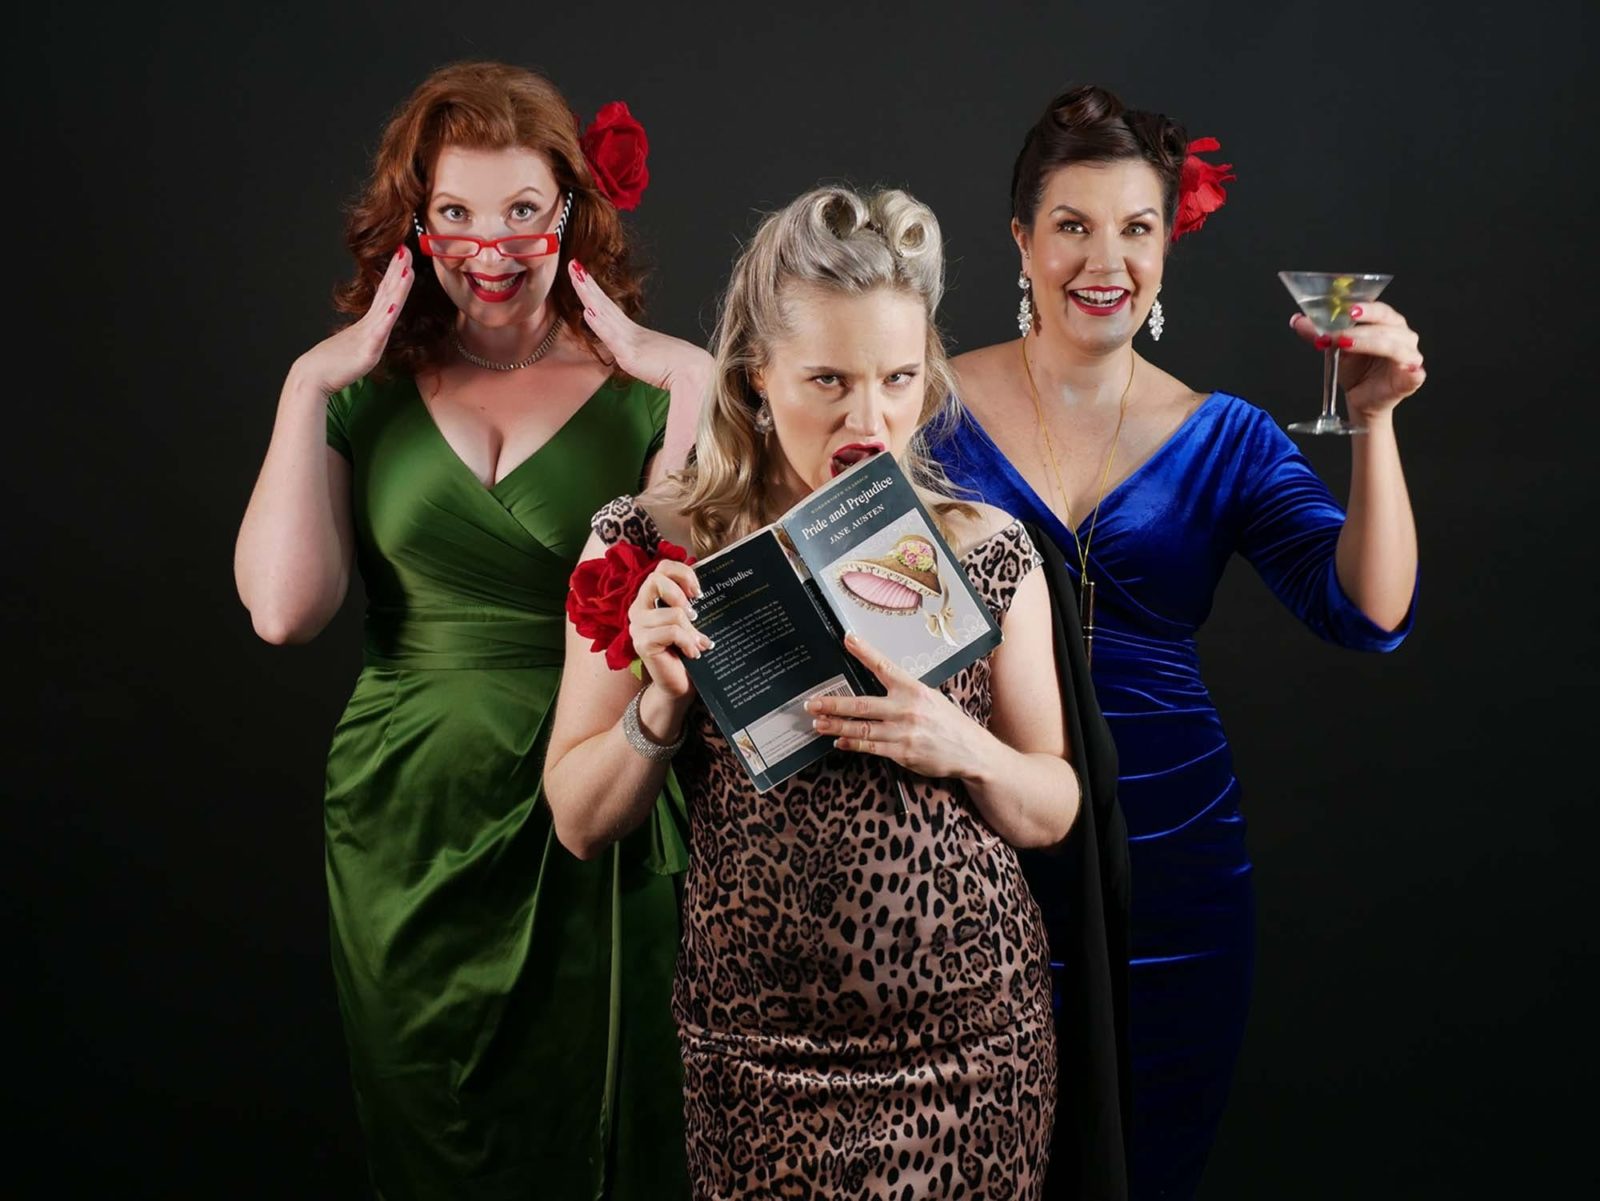 Three people standing against black backdrop, one holds a book, all wearing dresses and red lipstick